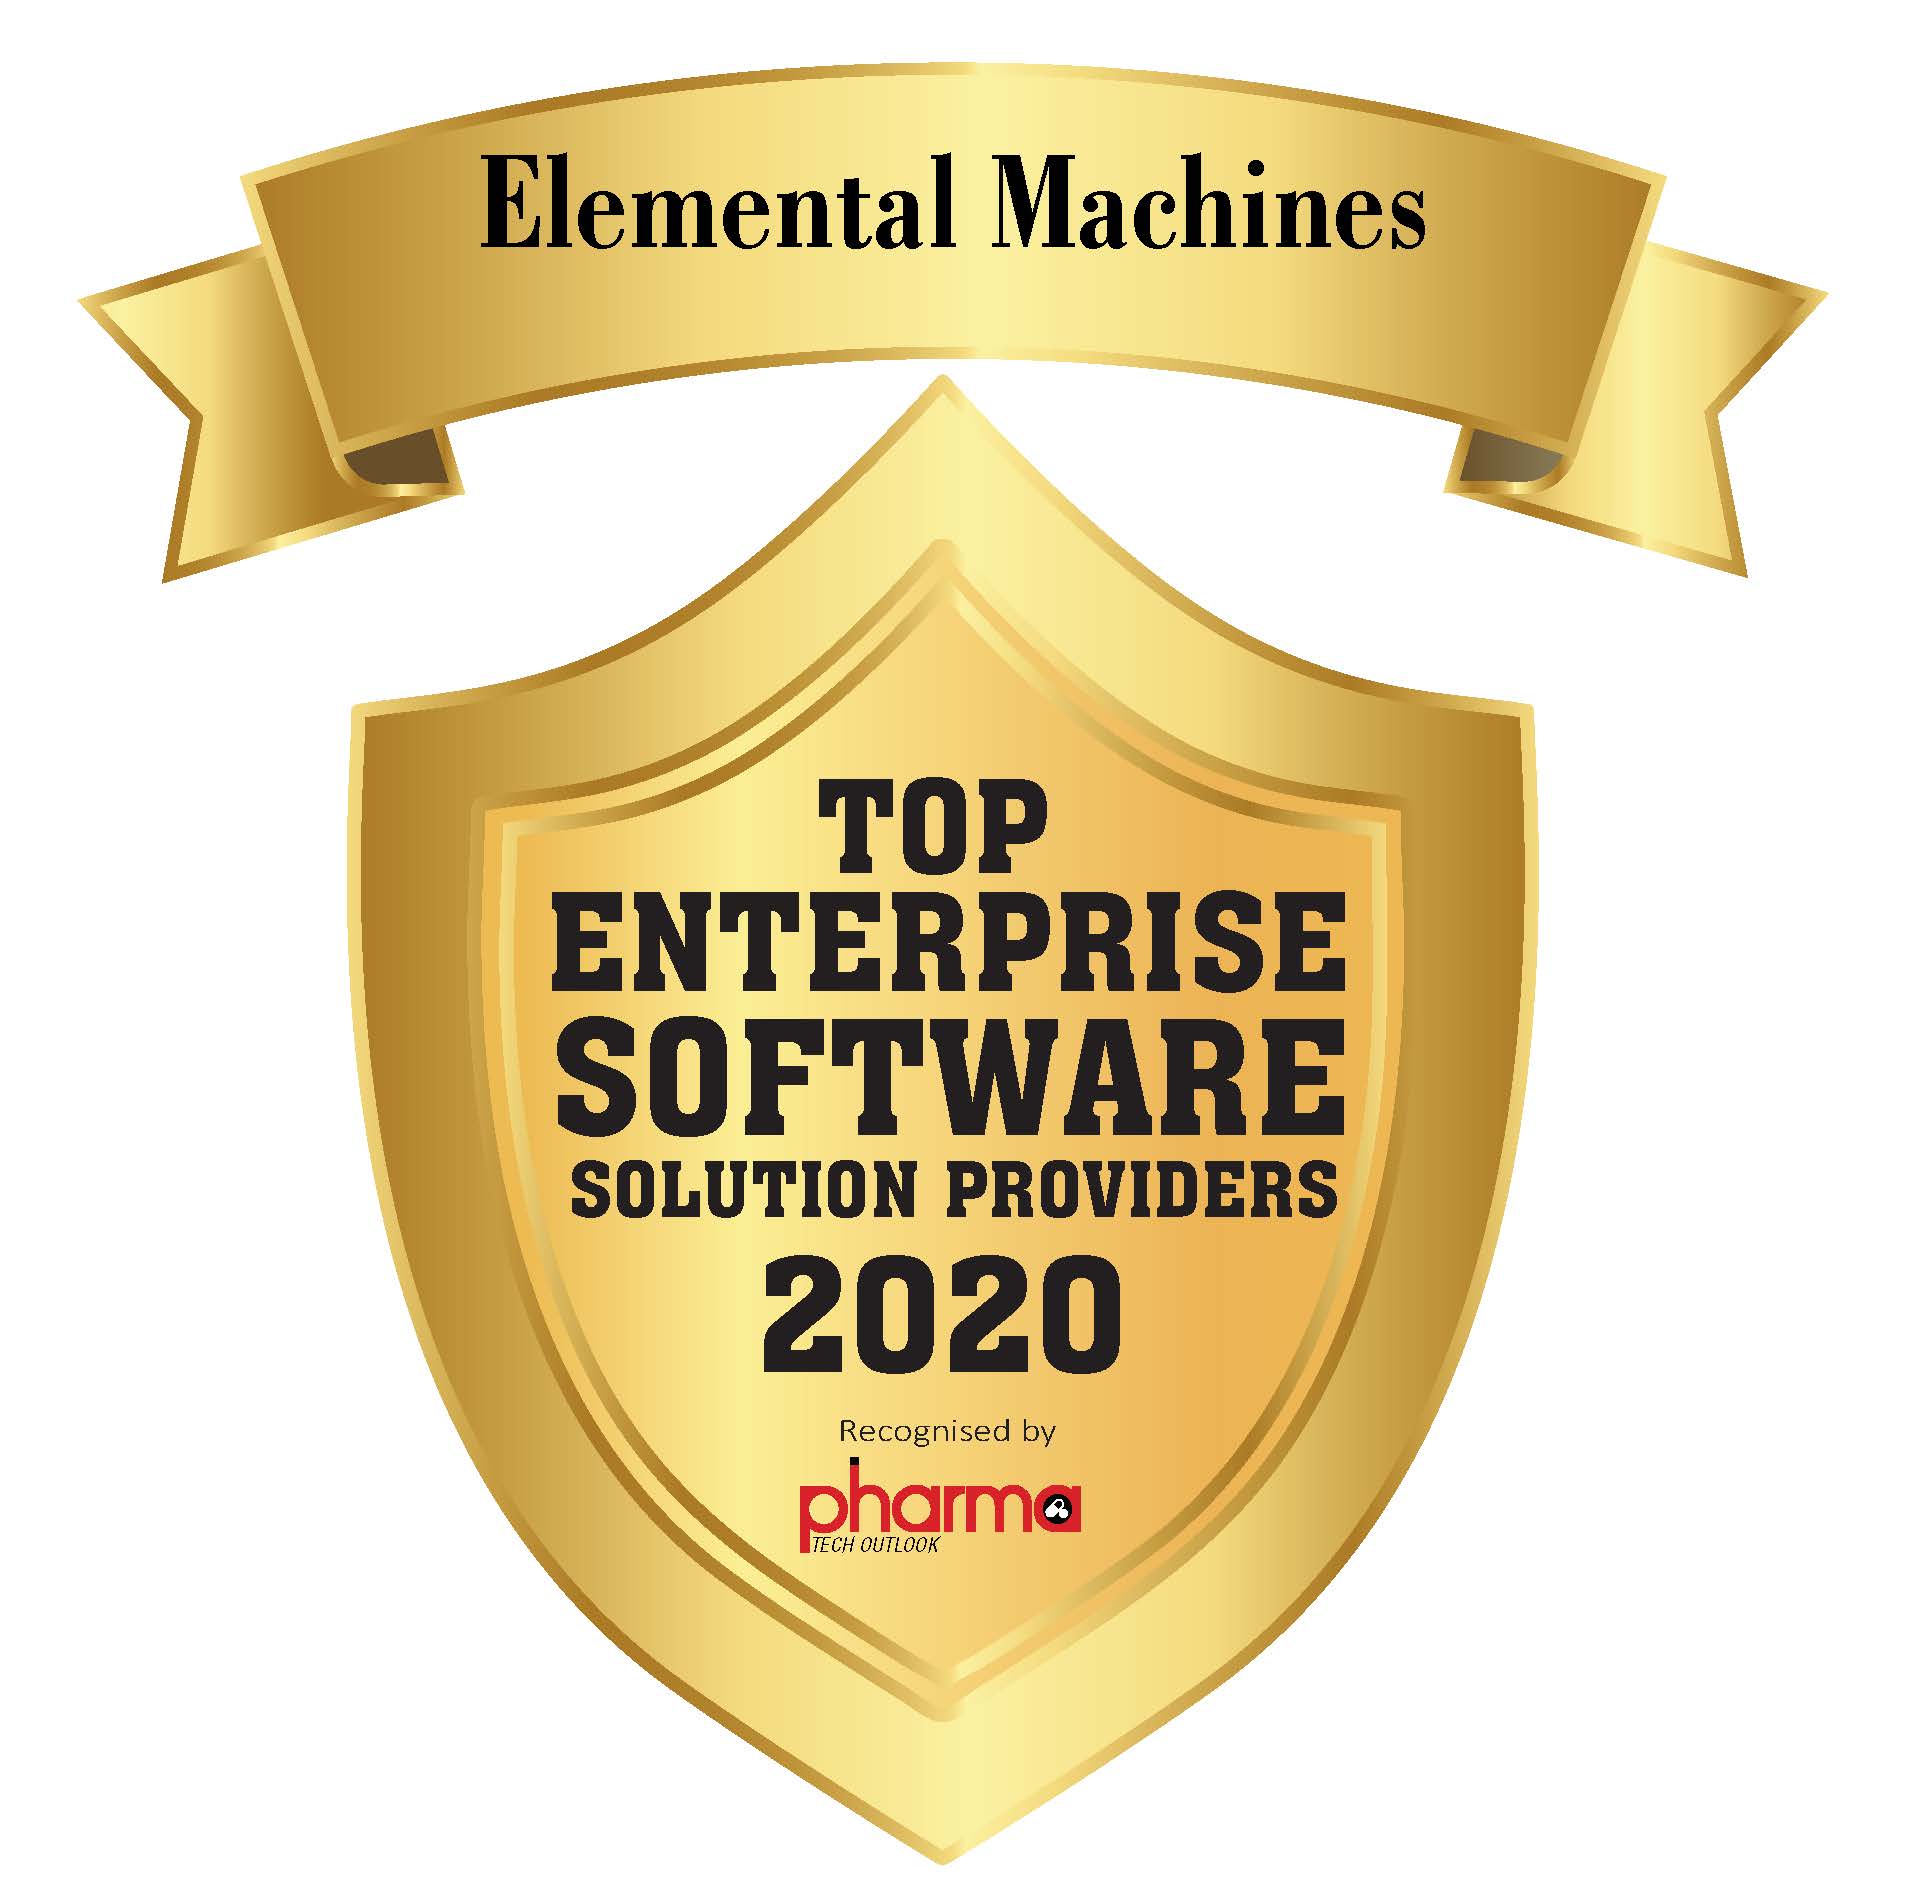 Elemental Machines Selected As Top 10 Enterprise Software Solutions Provider for 2020